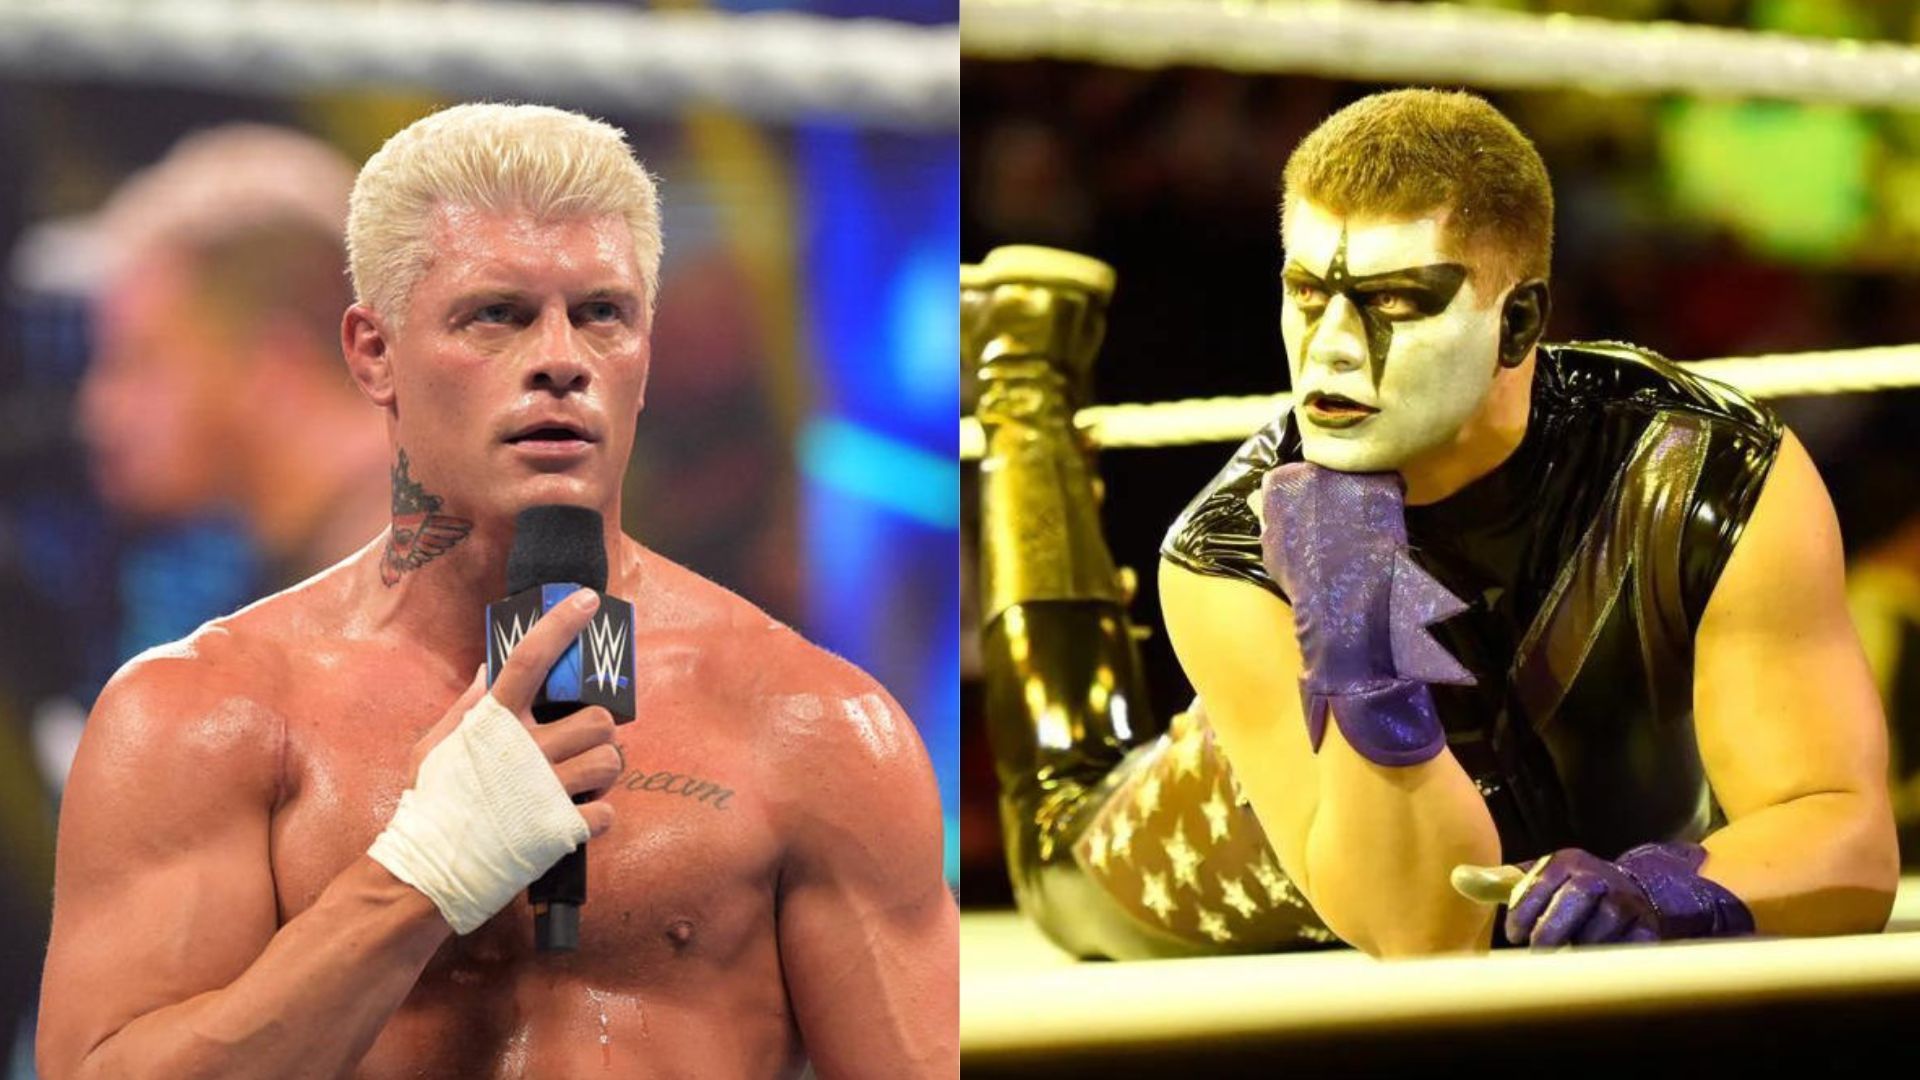 Cody Rhodes portrayed Stardust in WWE from 2014 to 2016